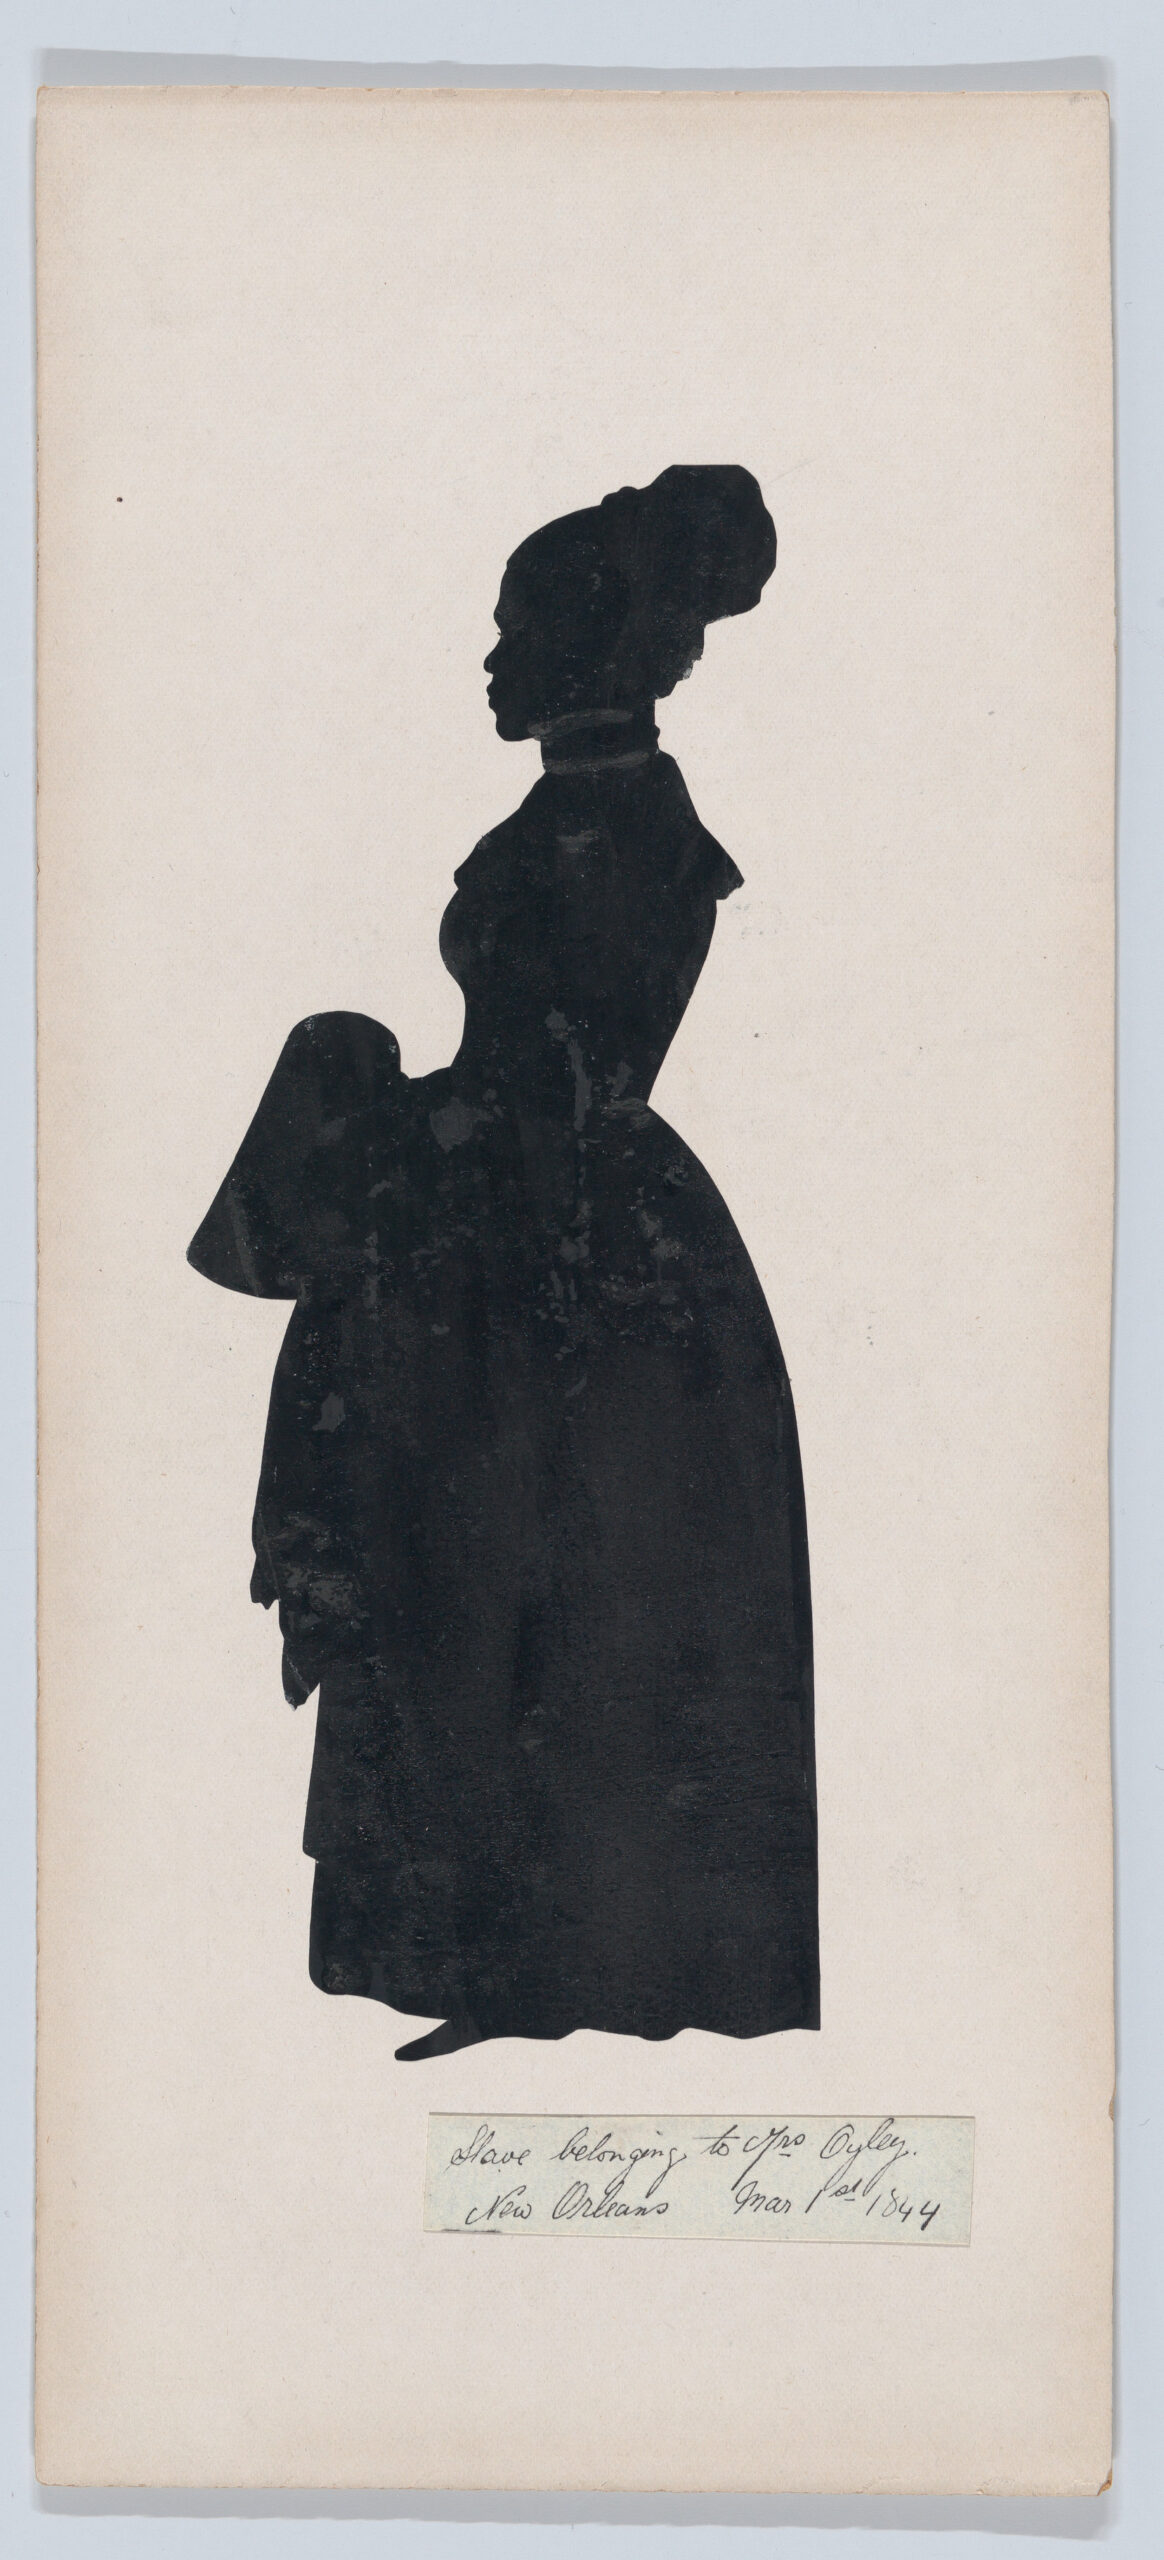 Full-length cut-paper silhouette of a woman in a long dress, with her hair tied up on top of her head, in black and white with white detailing